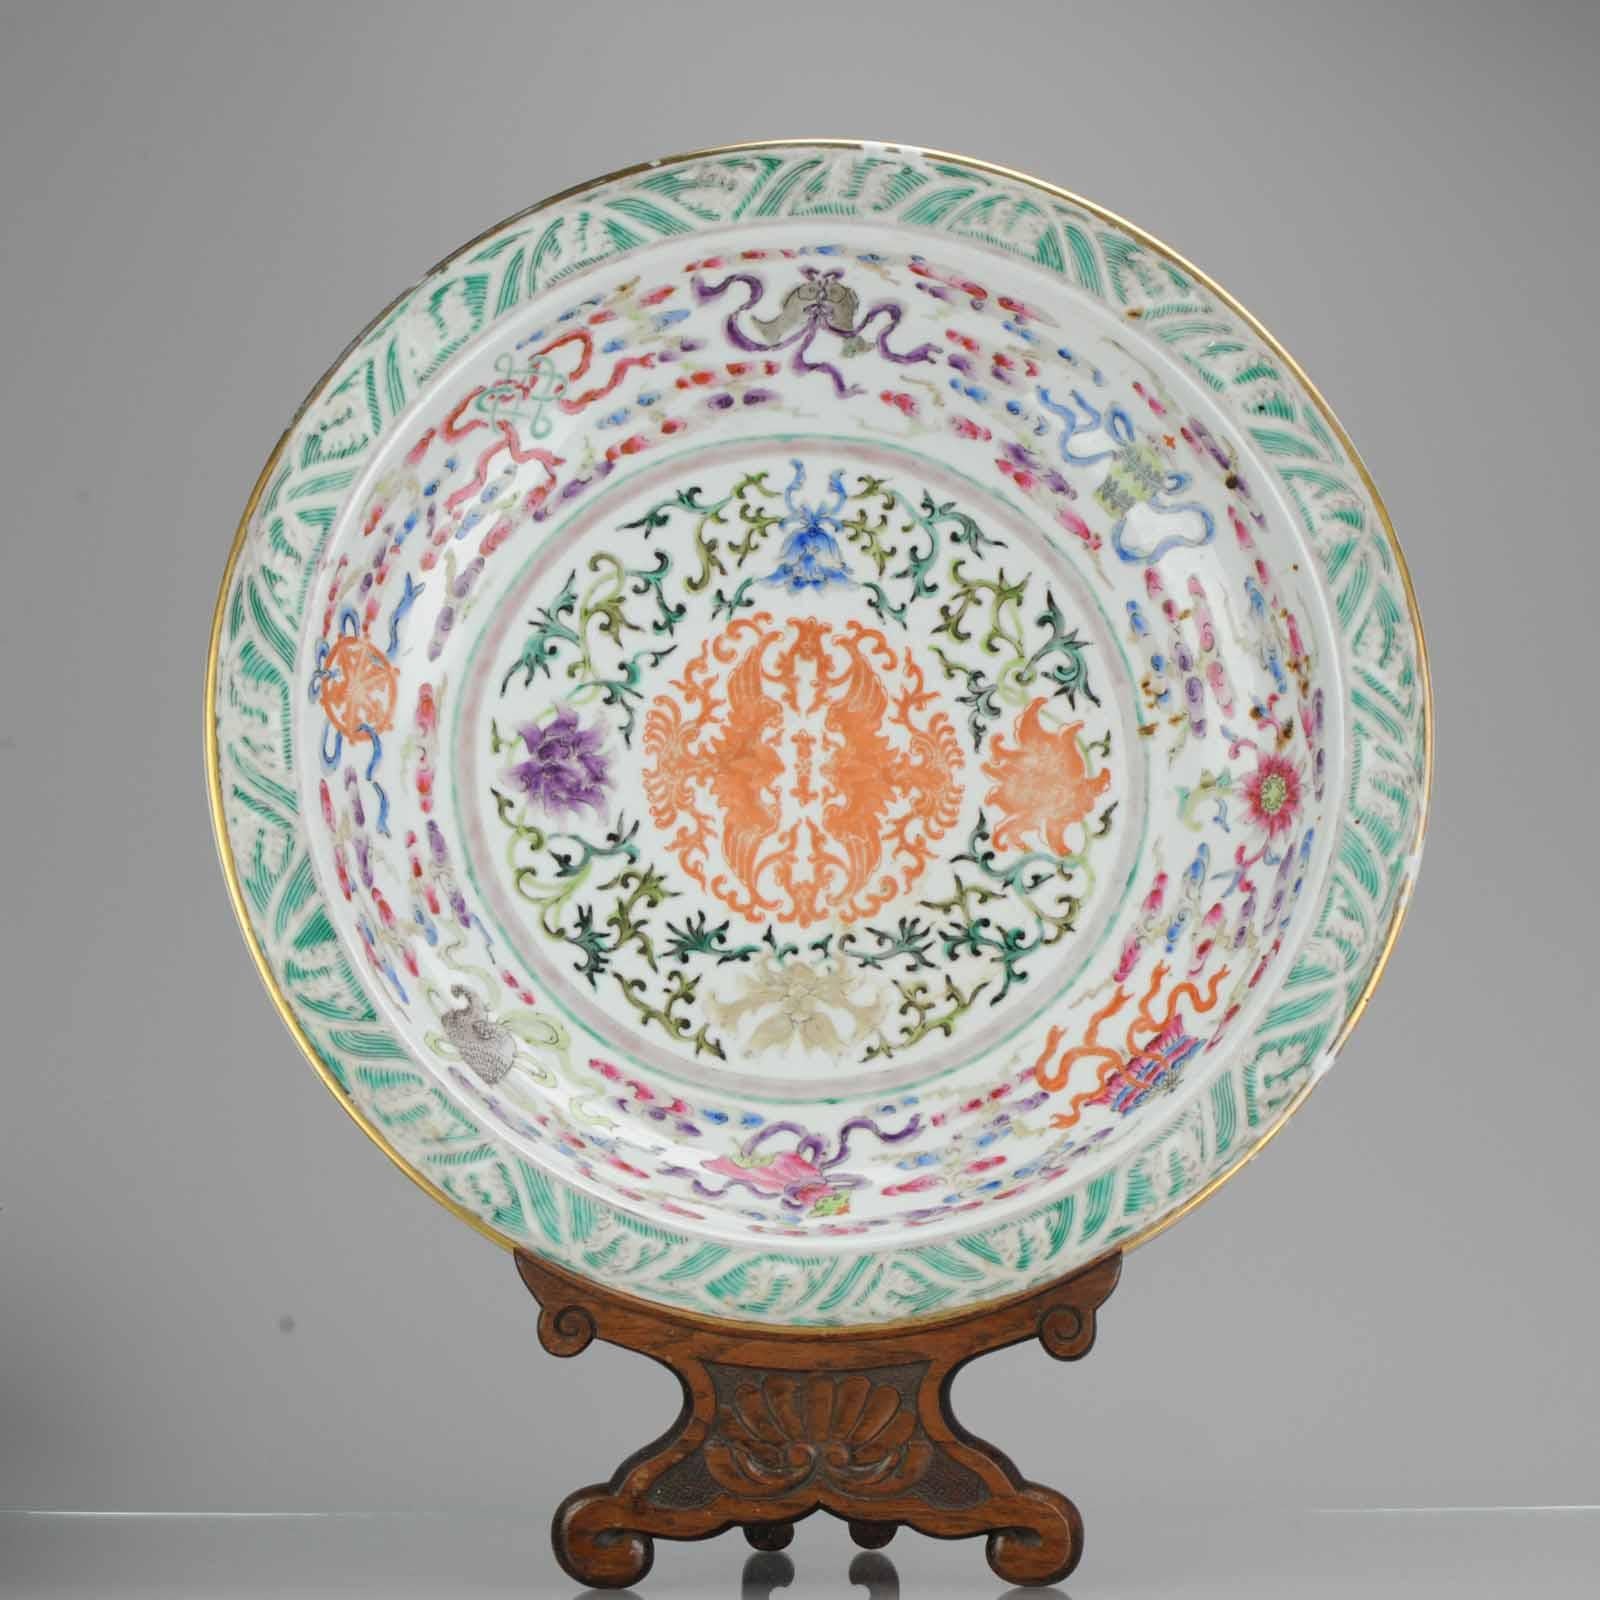 A pair of large famille rose 'phoenix and Buddhist Emblems' chargers
19th century
The wide, heavily potted dishes each brightly enameled to the centre with confronting phoenix surrounded with a lotus flower head Meander, further encircled with the